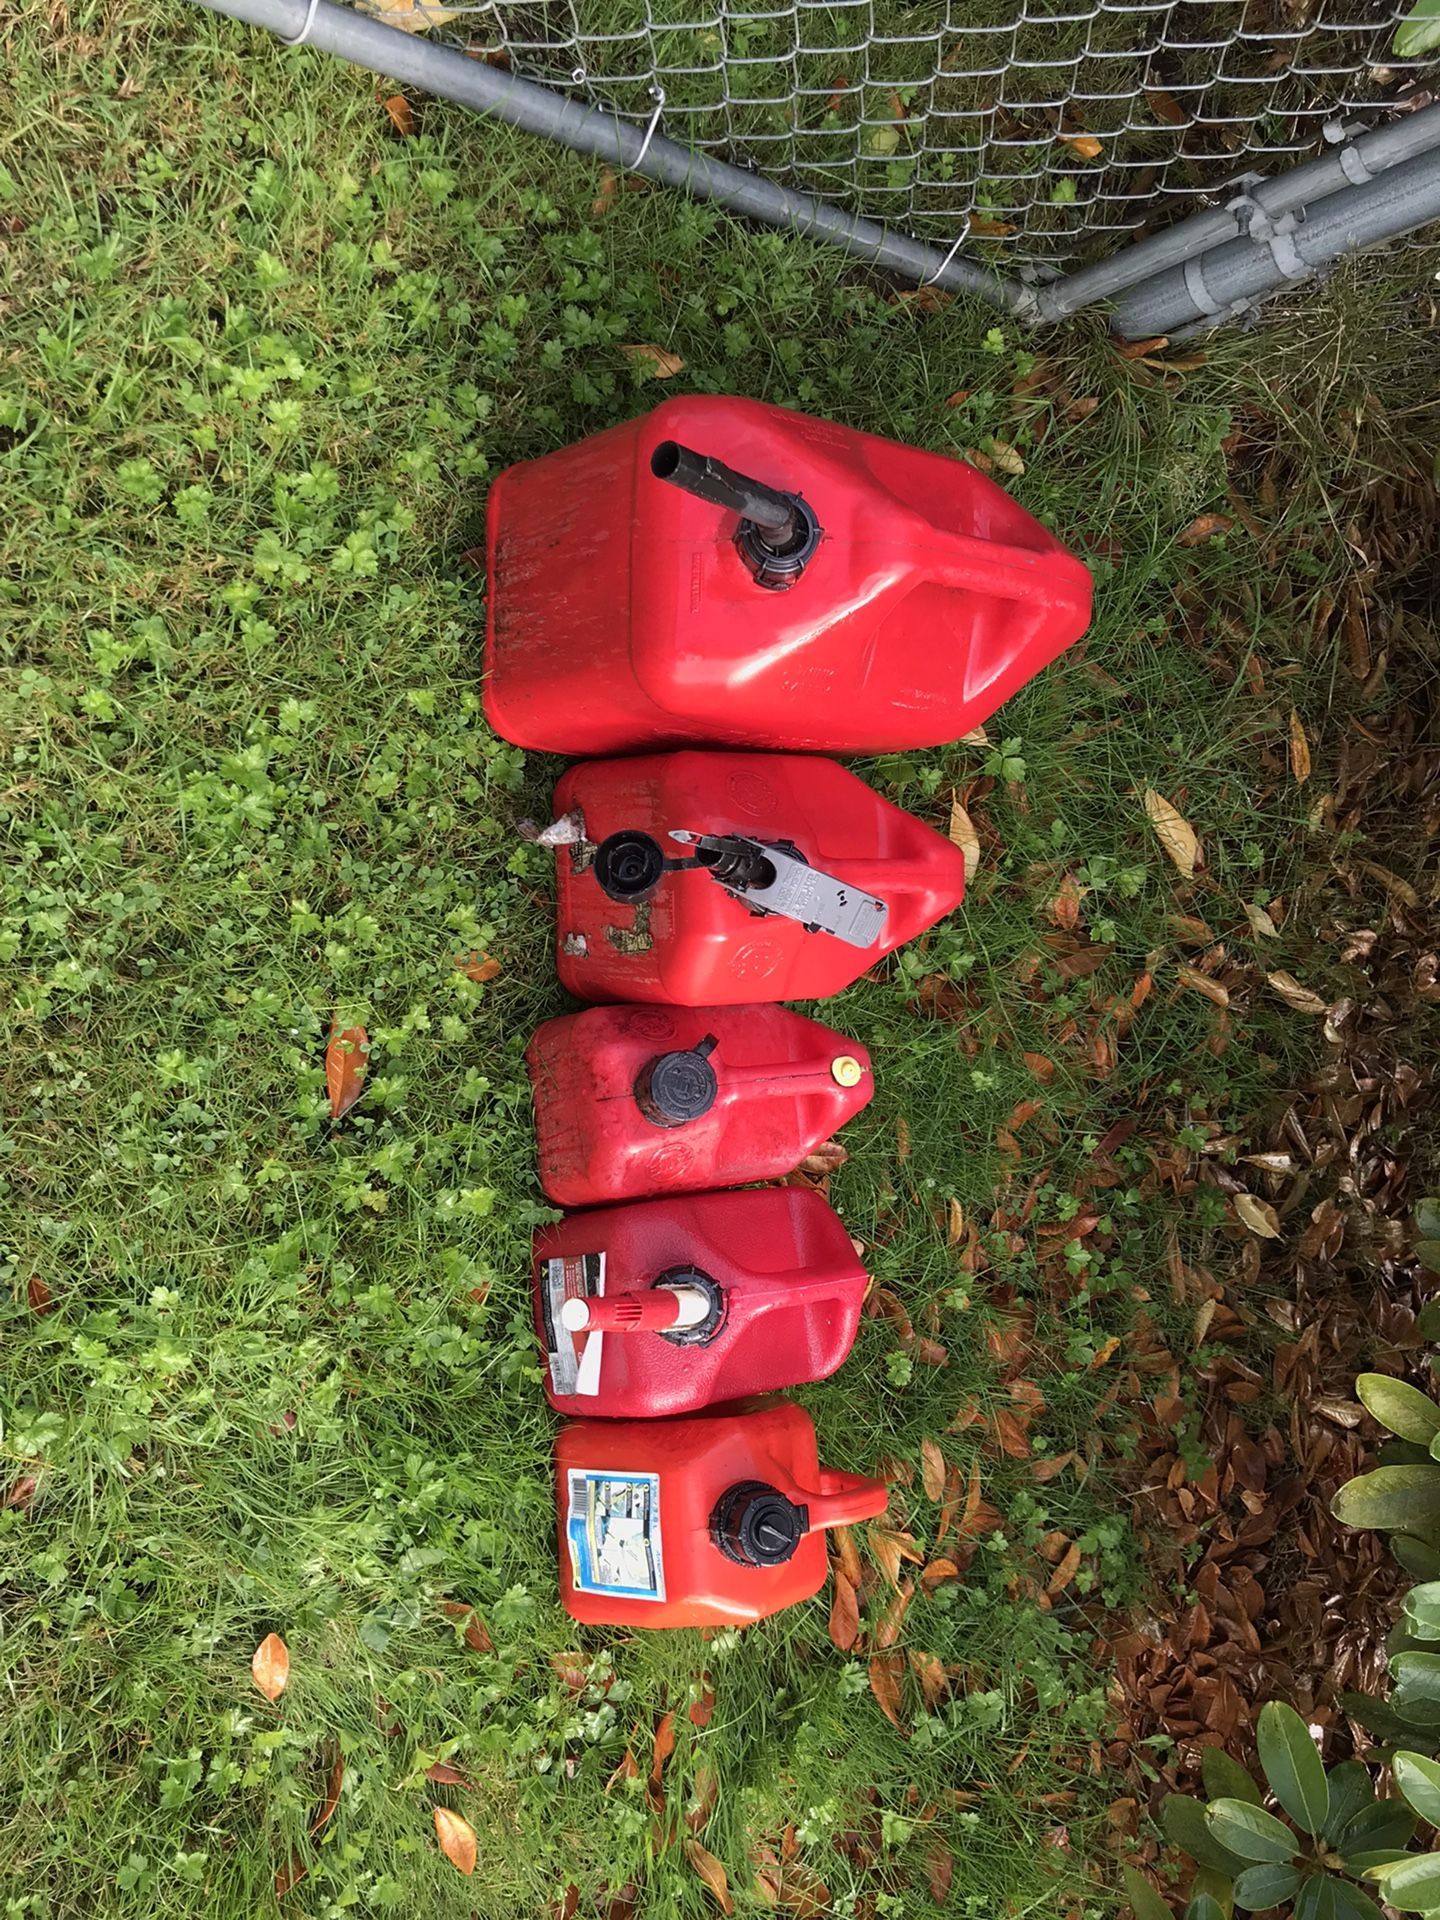 FREE gas cans… PENDING